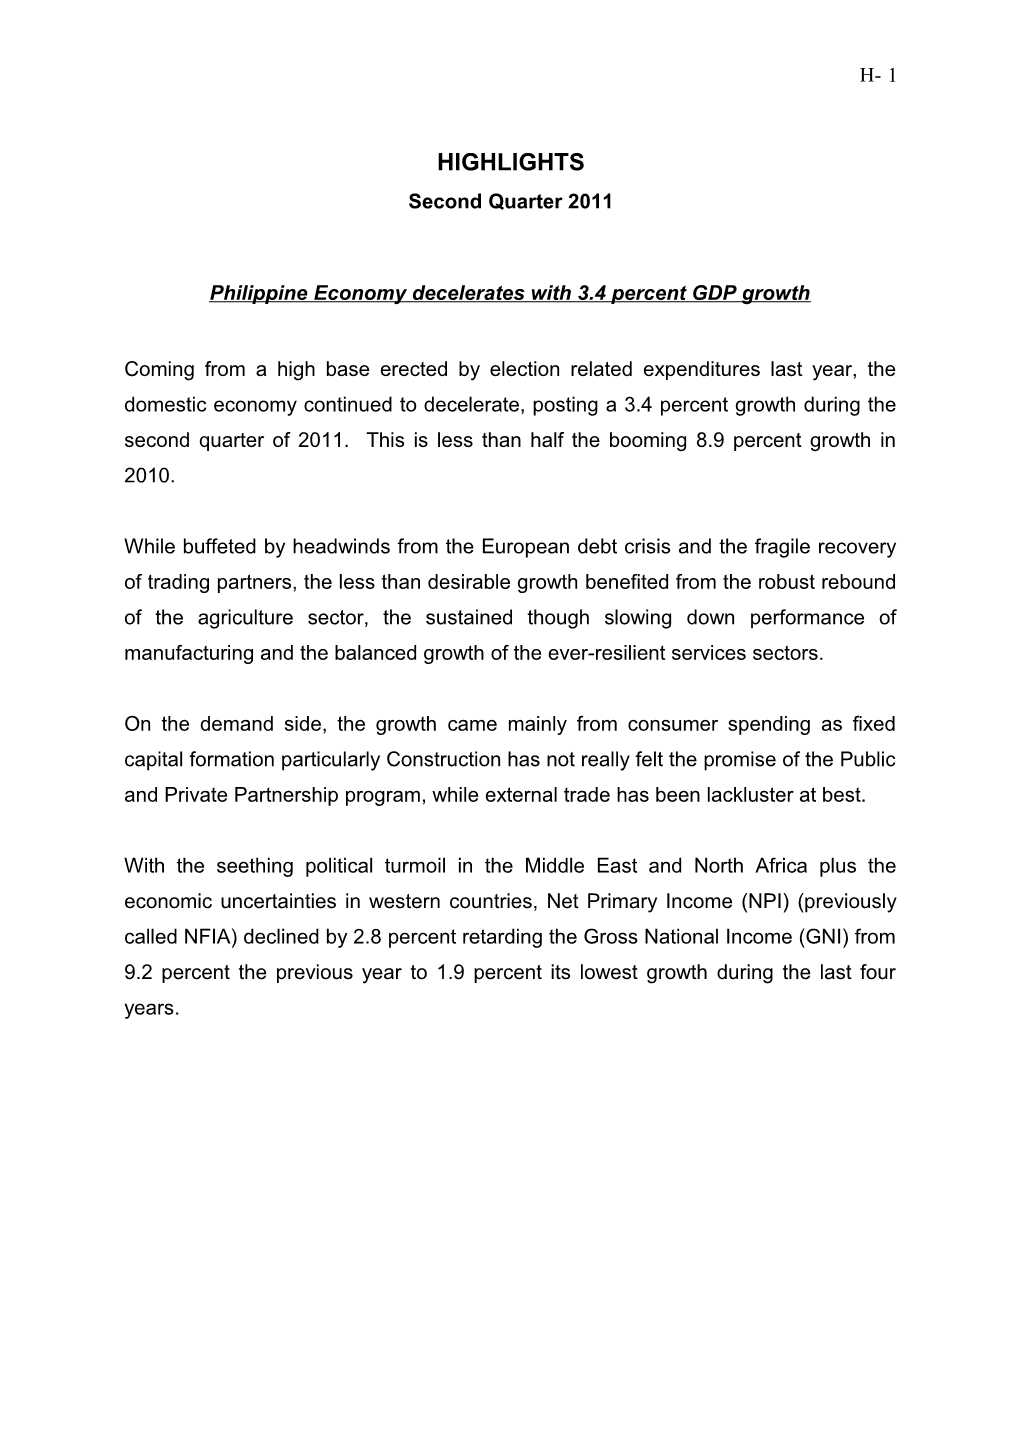 Philippine Economy Decelerates with 3.4 Percent GDP Growth